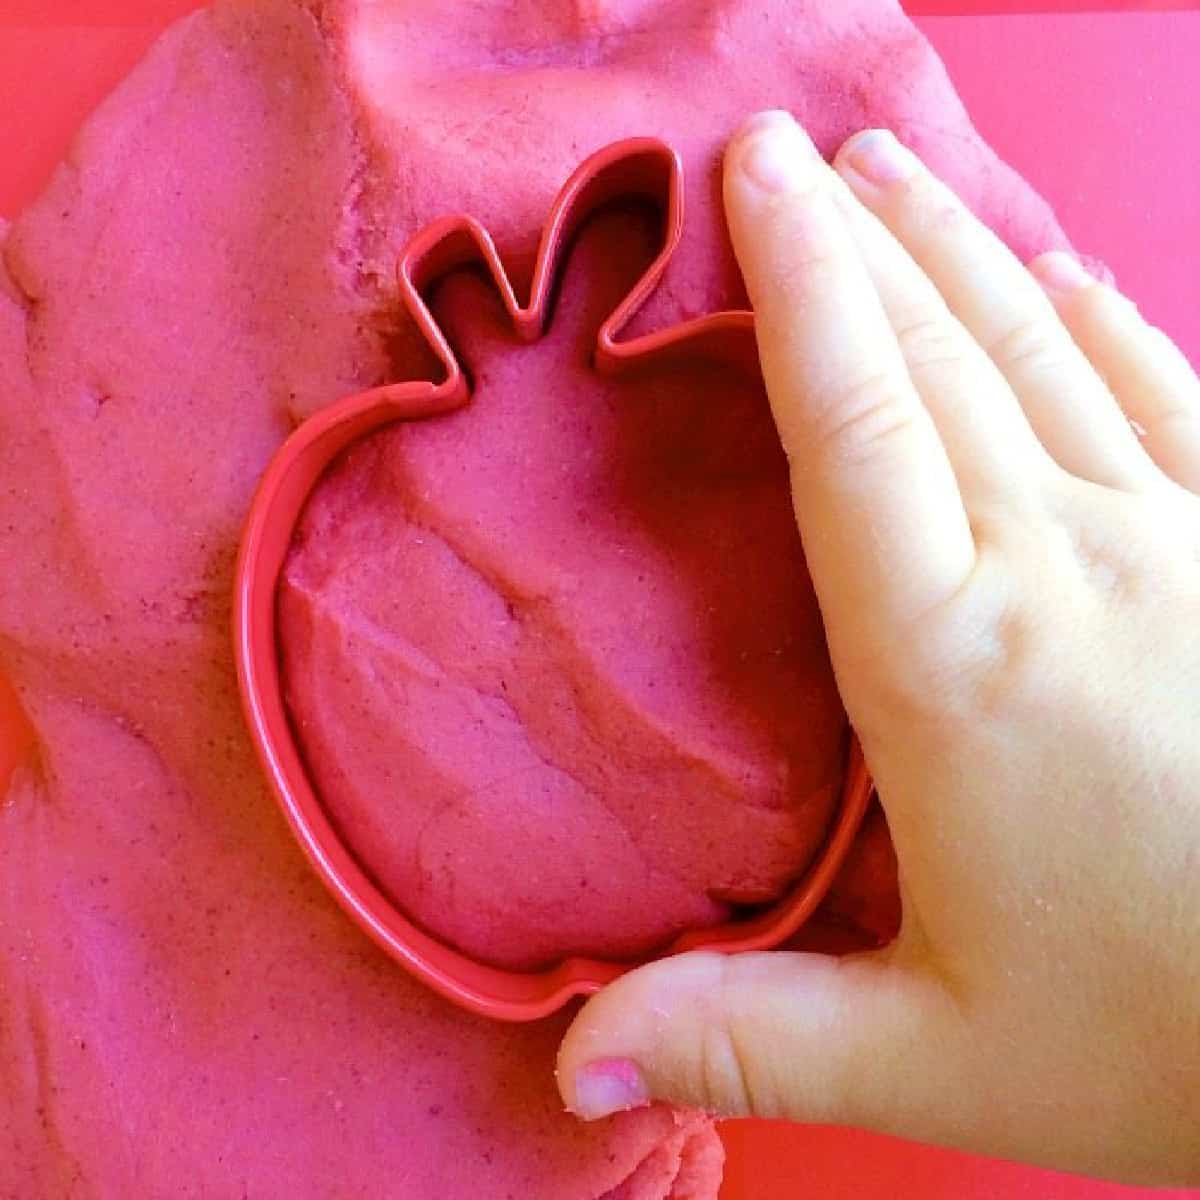 Child's hand on an apple cookie cutter pushed into play dough.